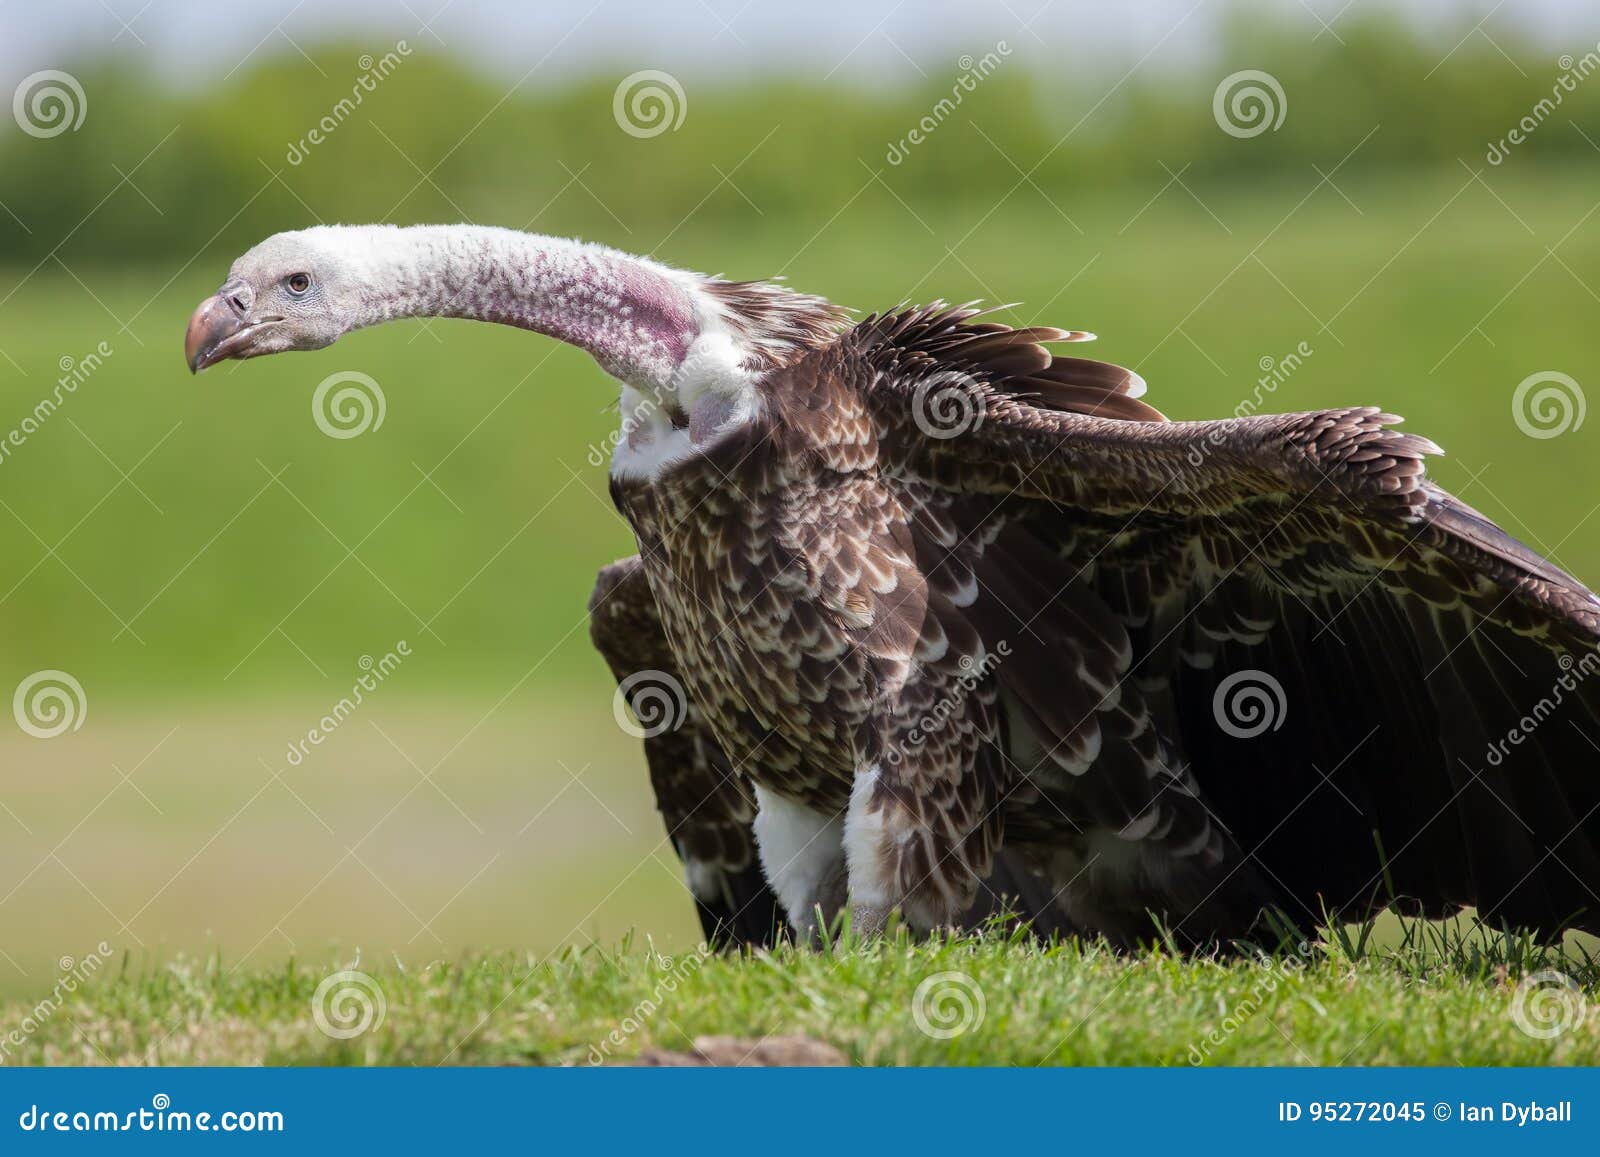 critically endangered species vulture showing evolutionary adapt